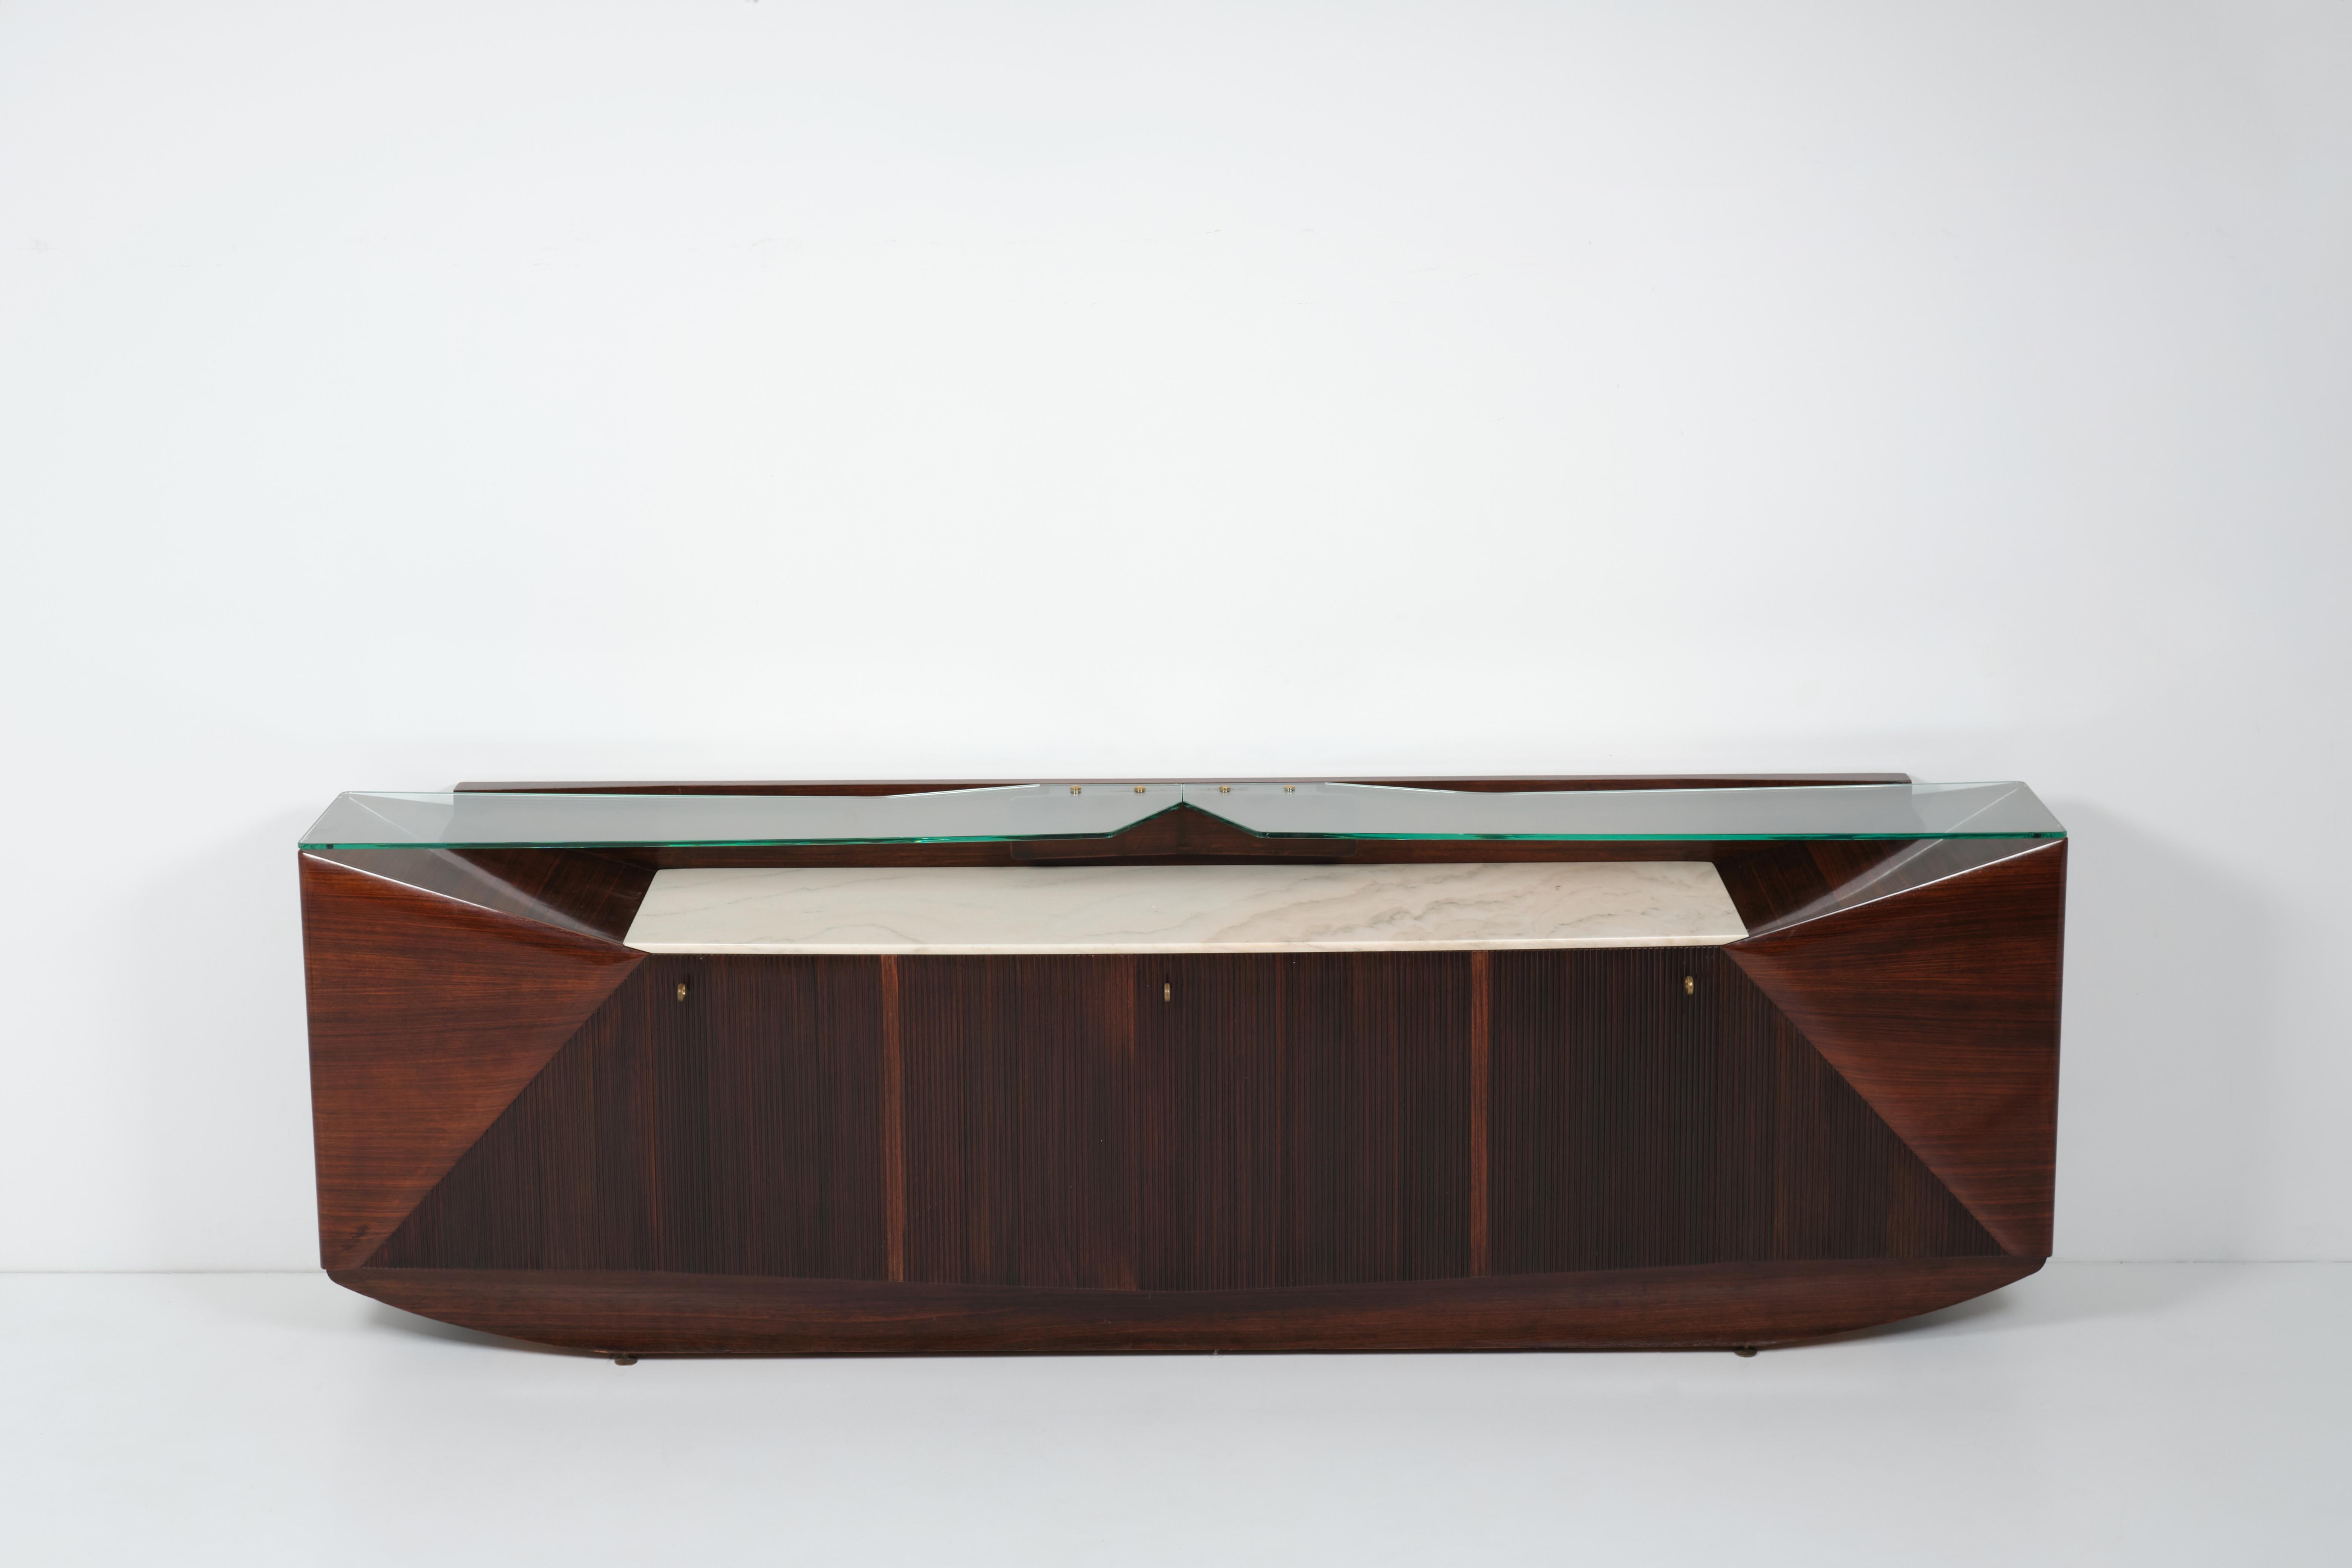 This big sideboard was manufactured by Dassi in the '50s. Its walnut body is embellished by tops mounted on different levels respectively in marble and bevelled glass, while brass details finish this solid yet elegant item.
Equipped with shelves